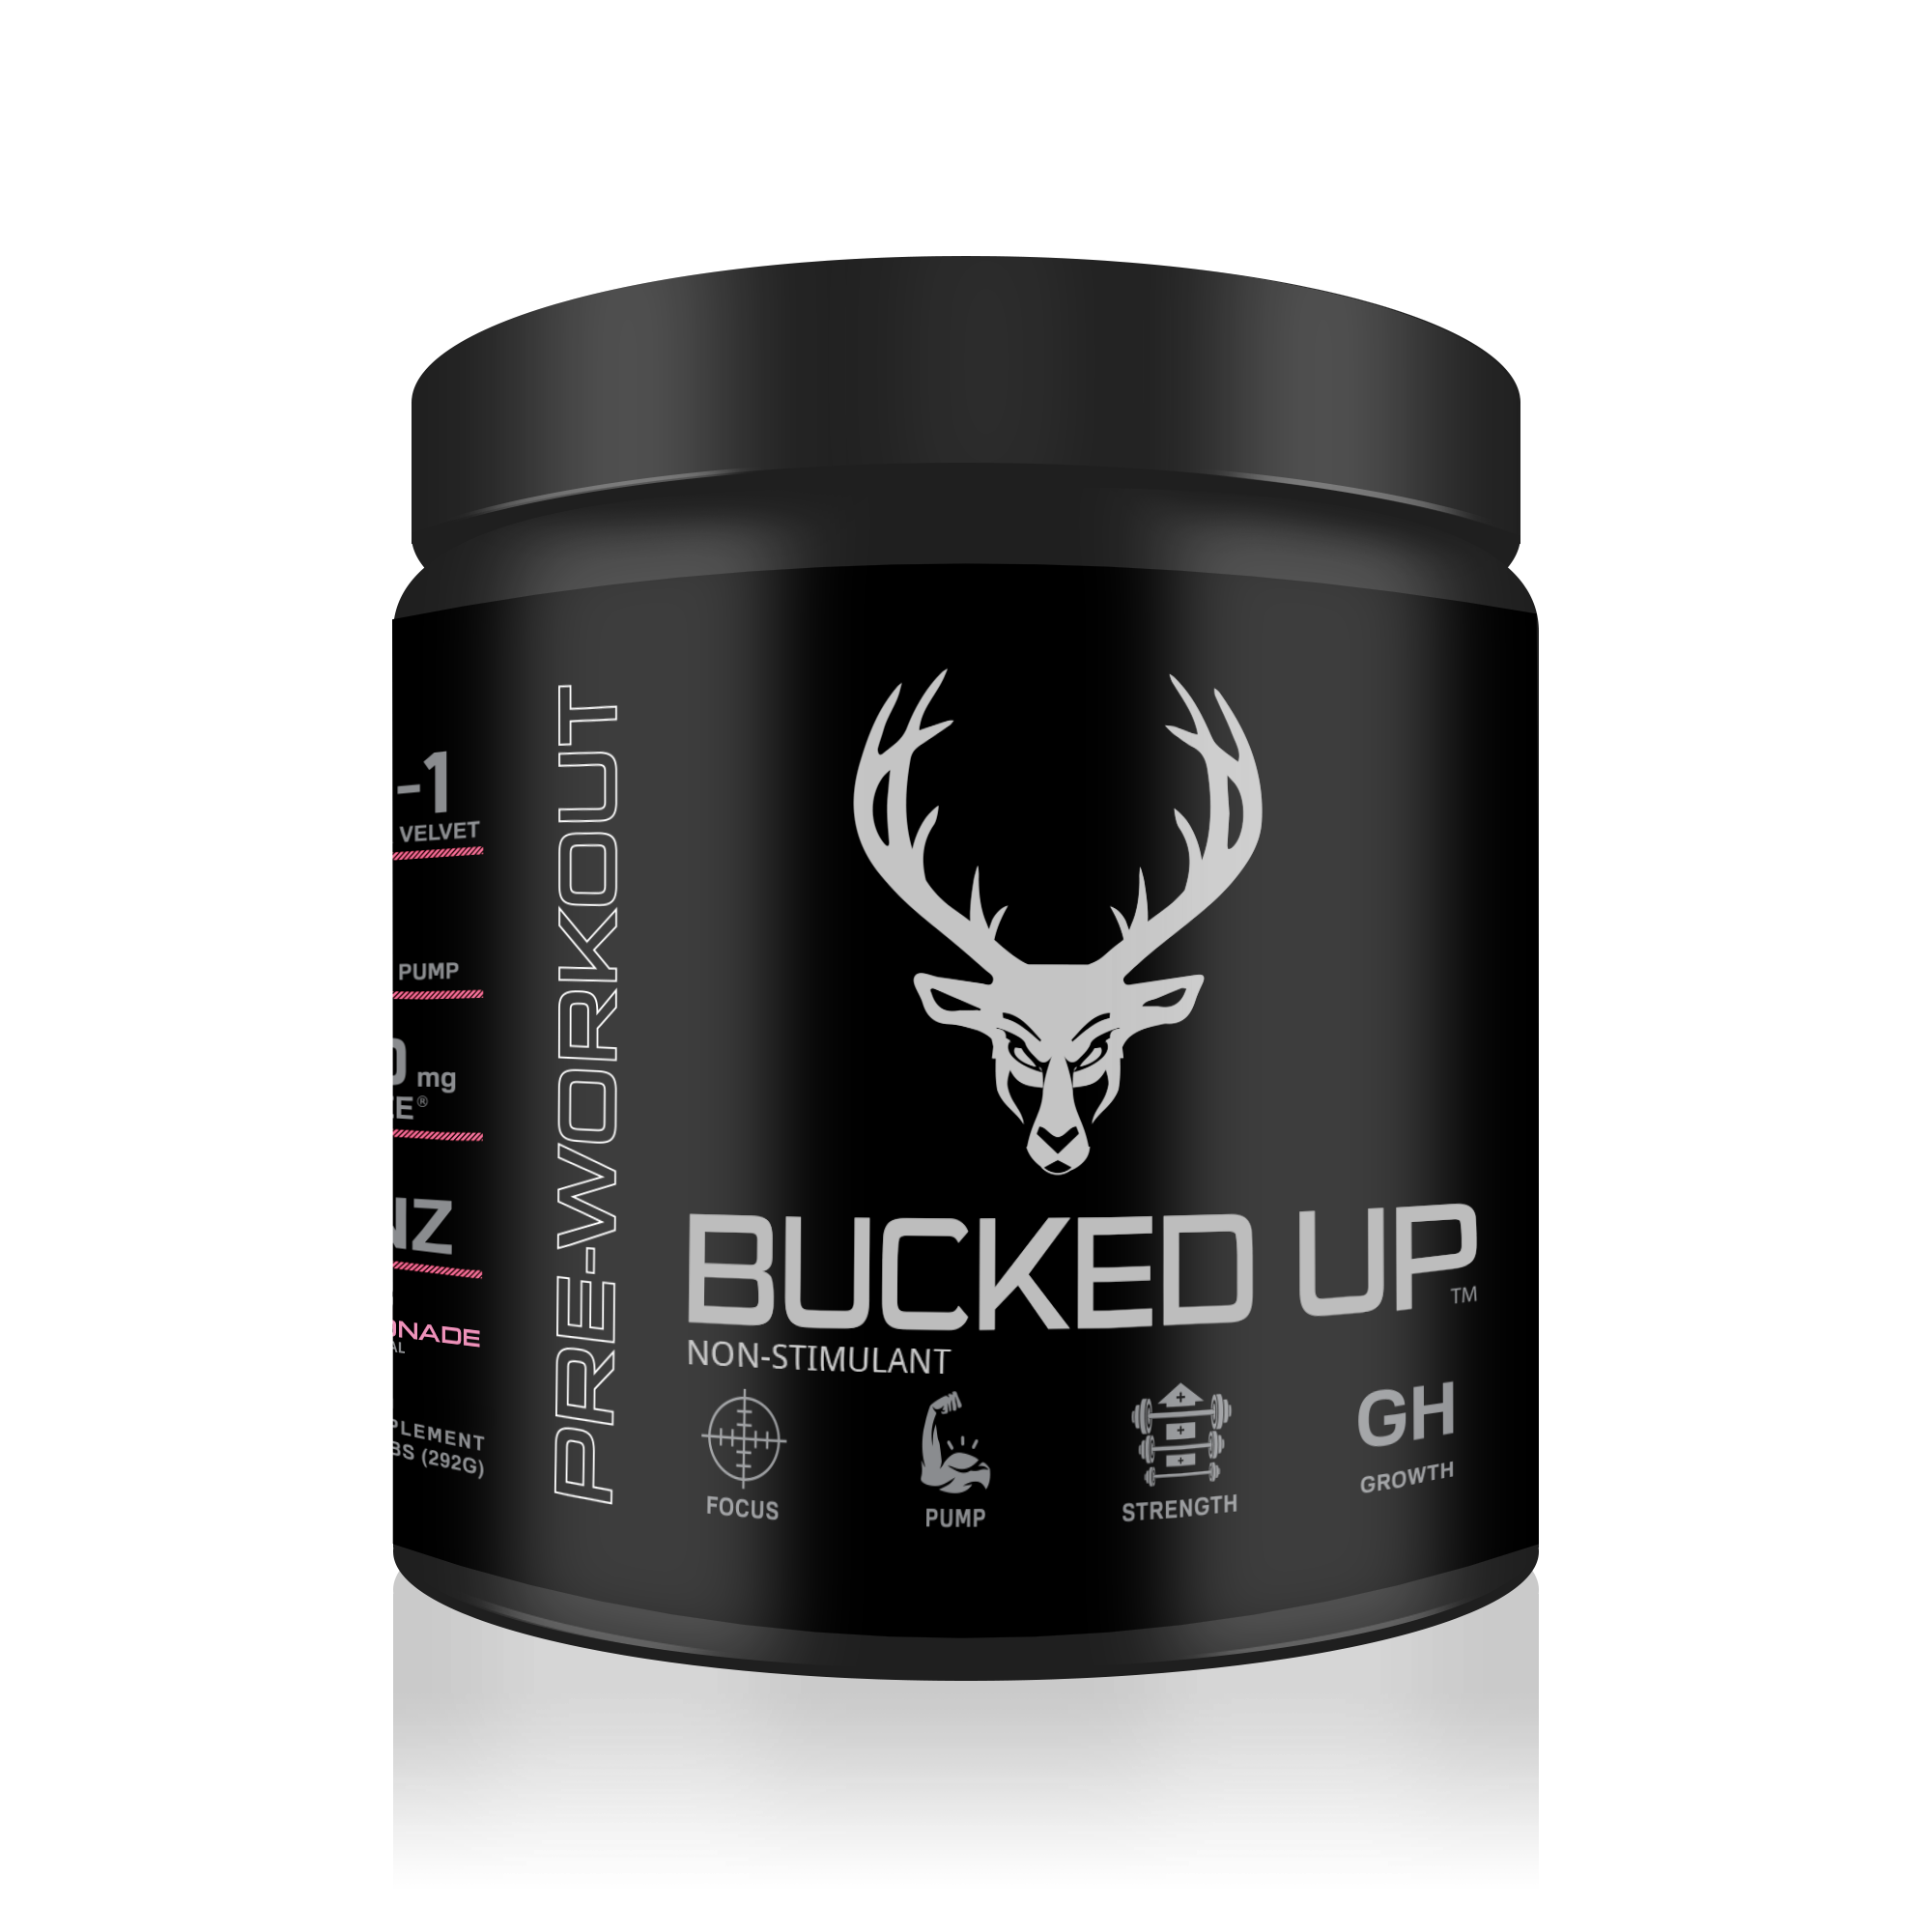 Same great Bucked Up® formula, without the caffeine! Great ...